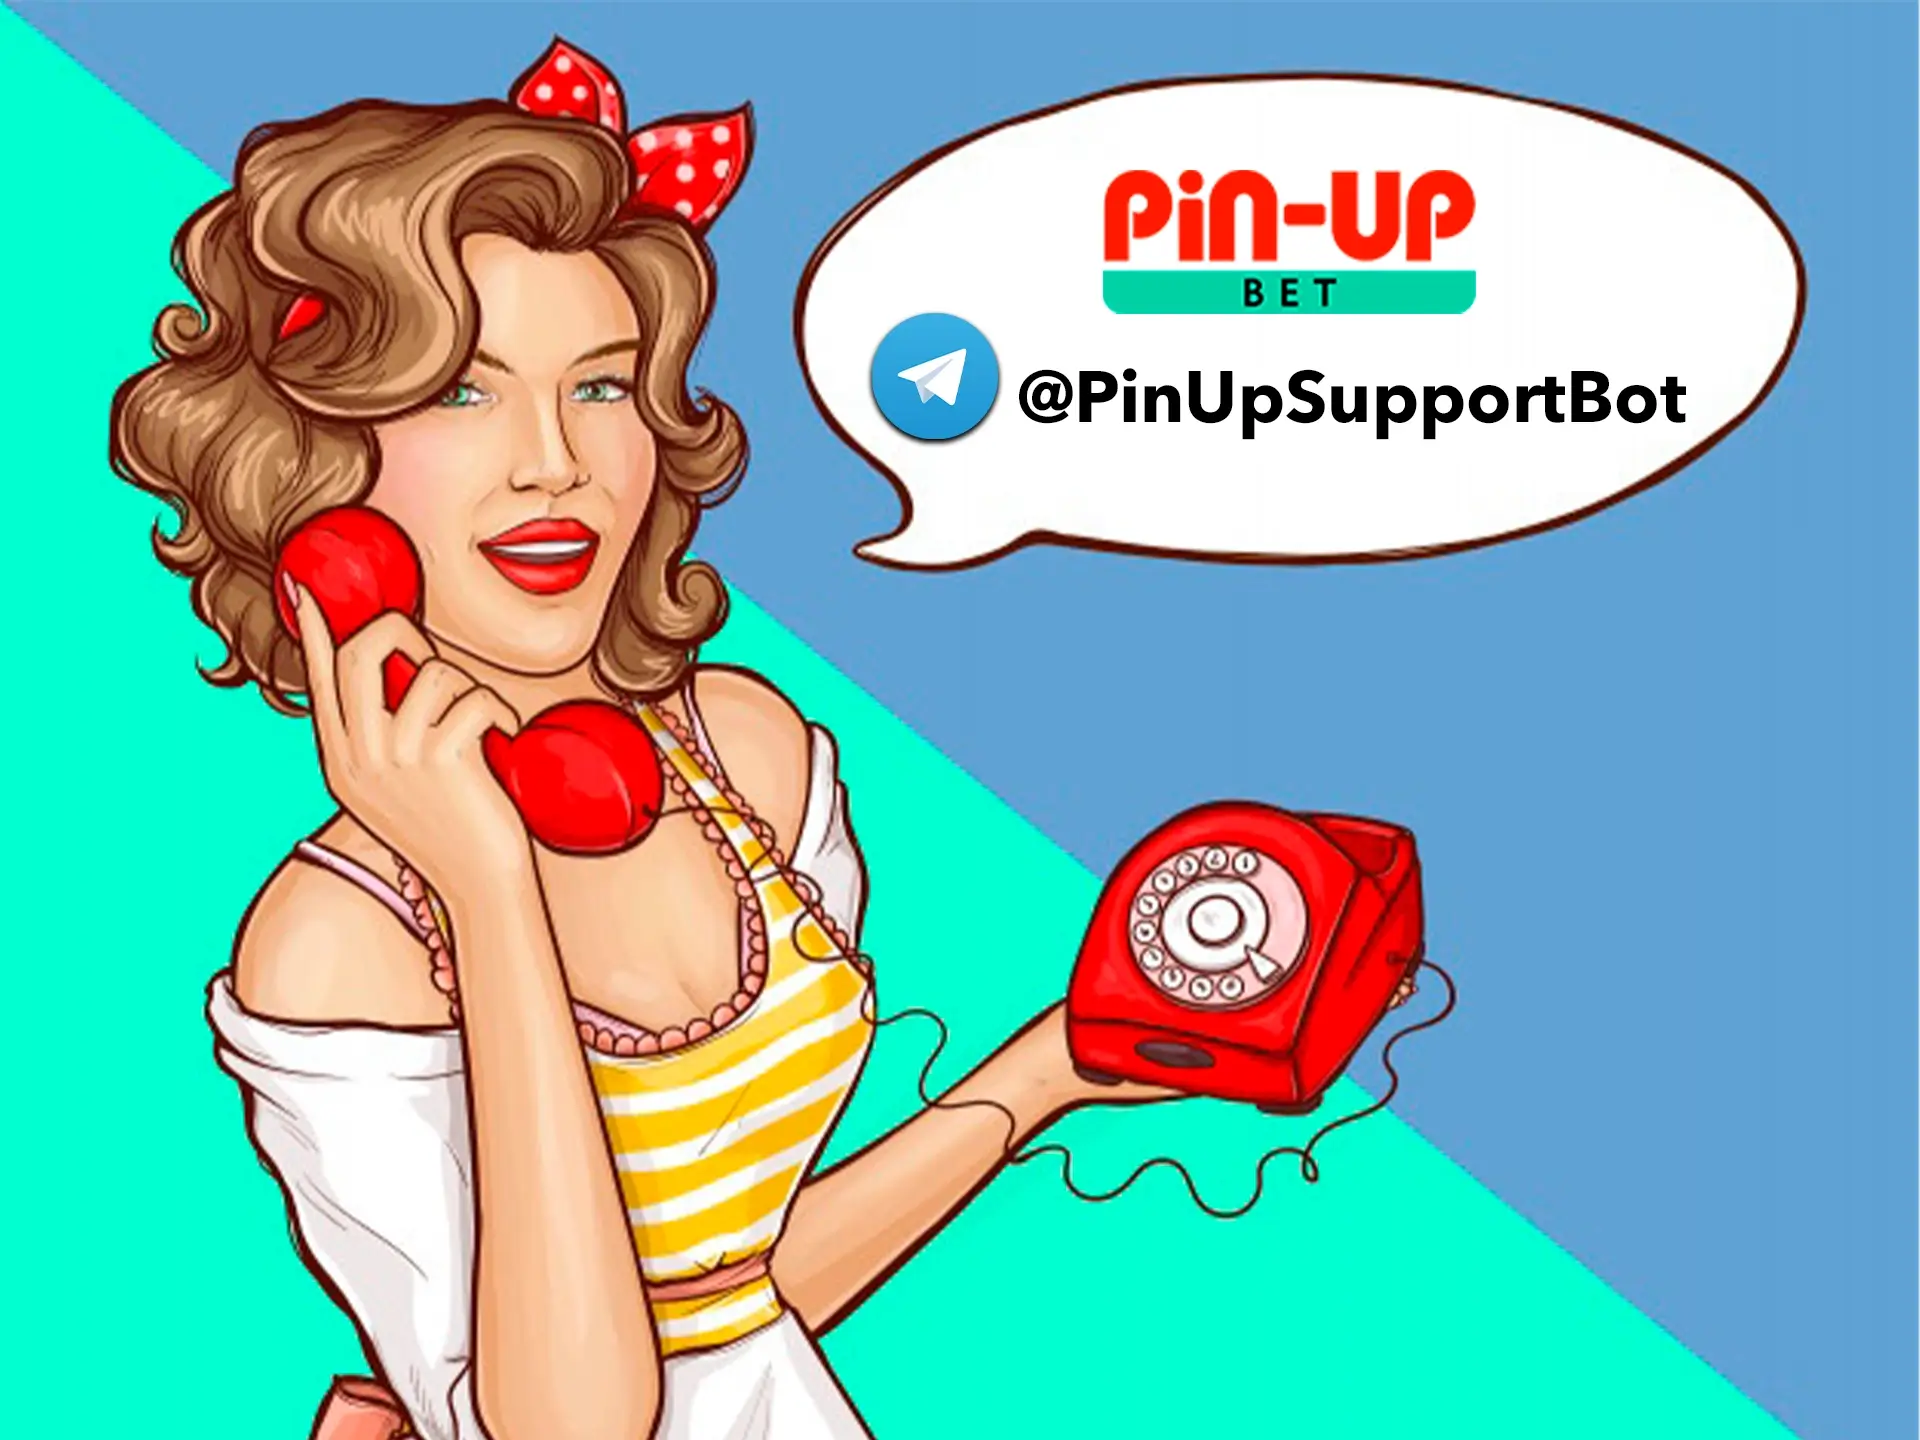 You can also message the Pin Up team on Telegram if you have any urgent questions.